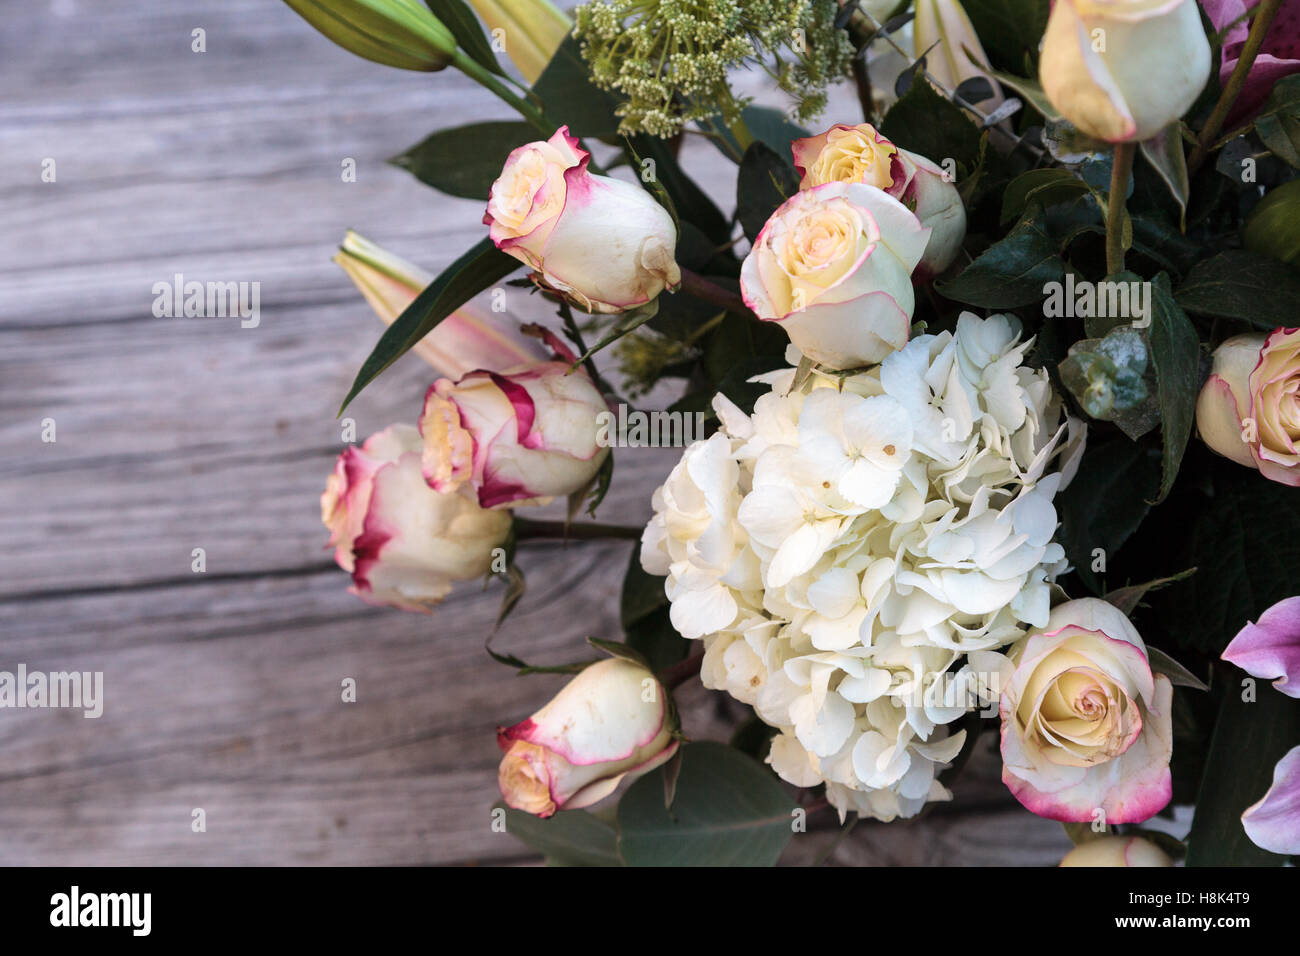 Wedding bouquet of white and pink flowers including roses, hydrangea, star gazer lilies and queen annes lace on a rustic table i Stock Photo